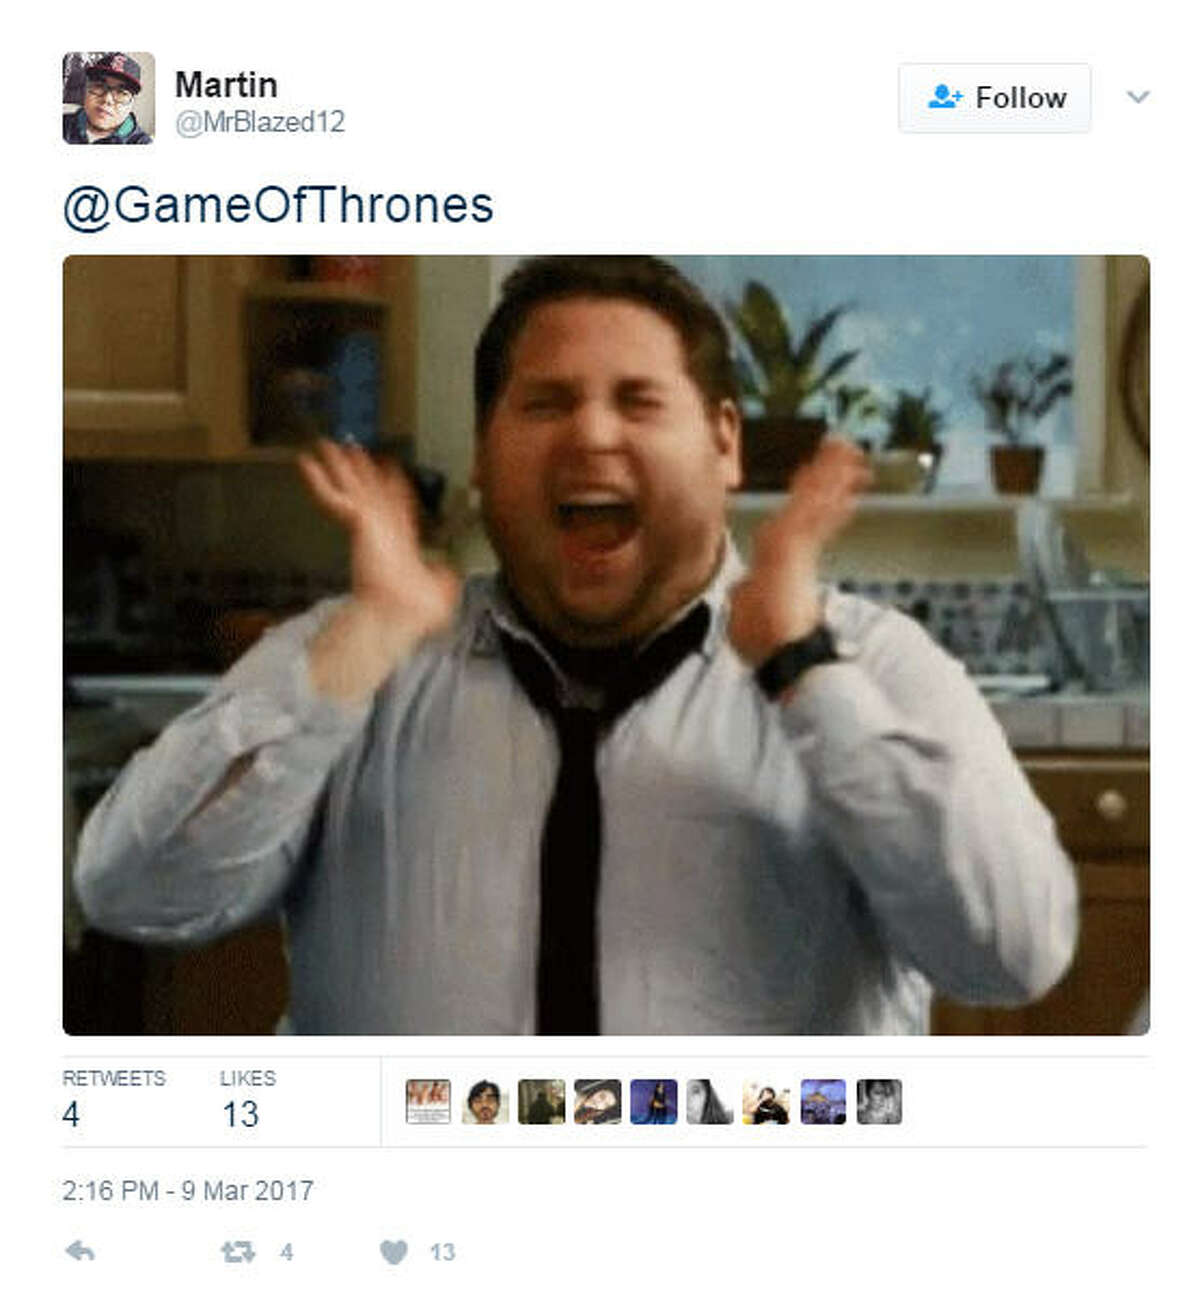 Game of Thrones fans shared their excitement on Twitter after HBO announced the long-awaited premiere date for Season 7 of the hit show. (Source: Twitter)